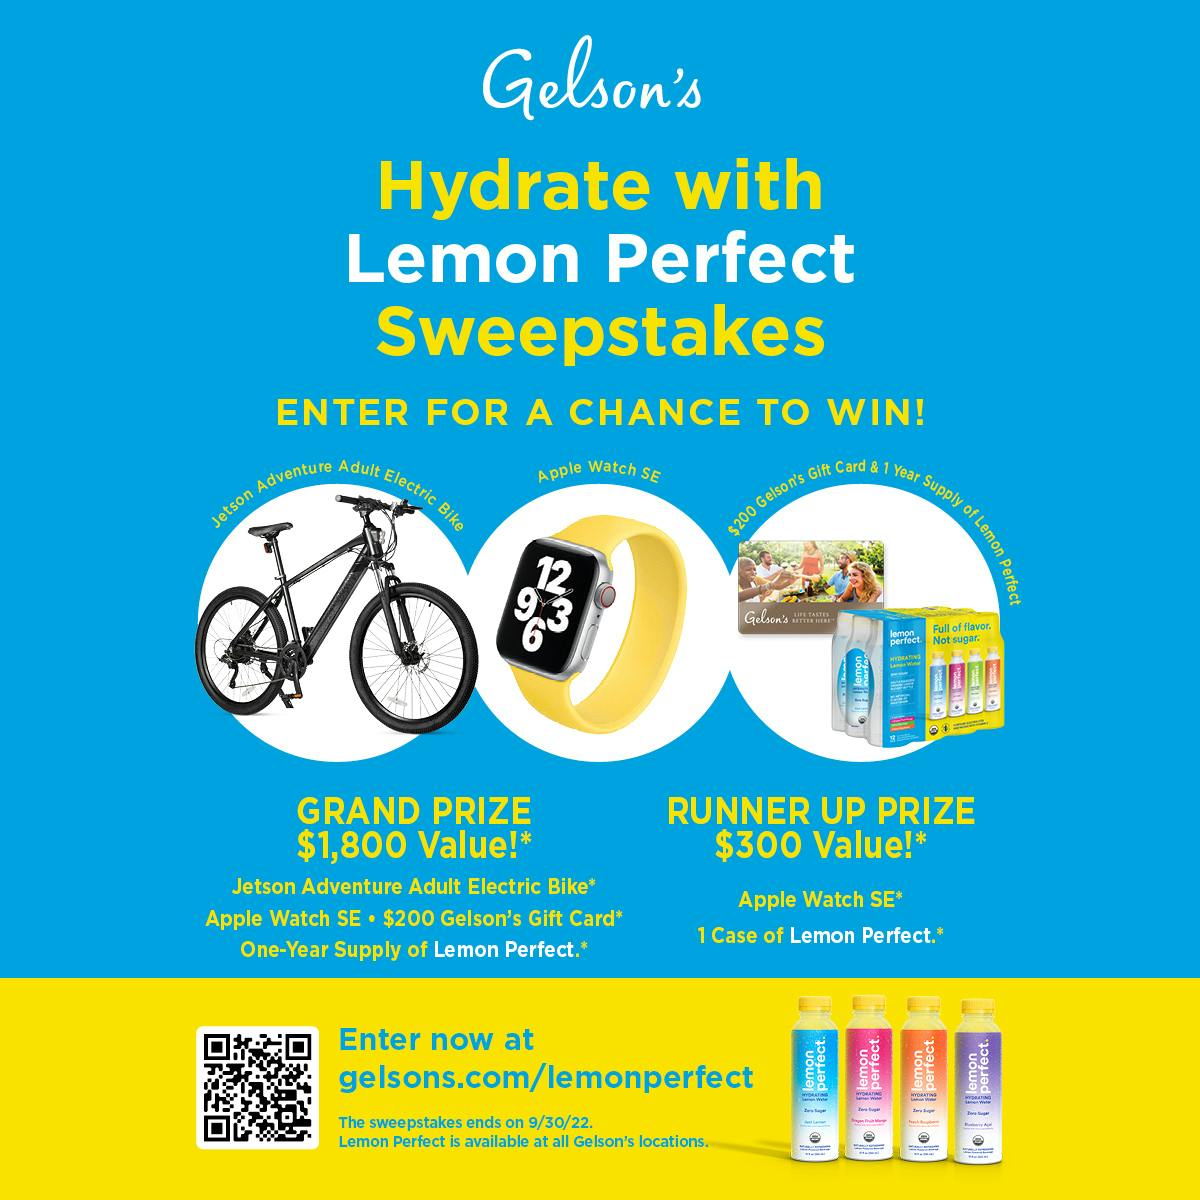 Hydrate with Lemon Perfect Sweepstakes